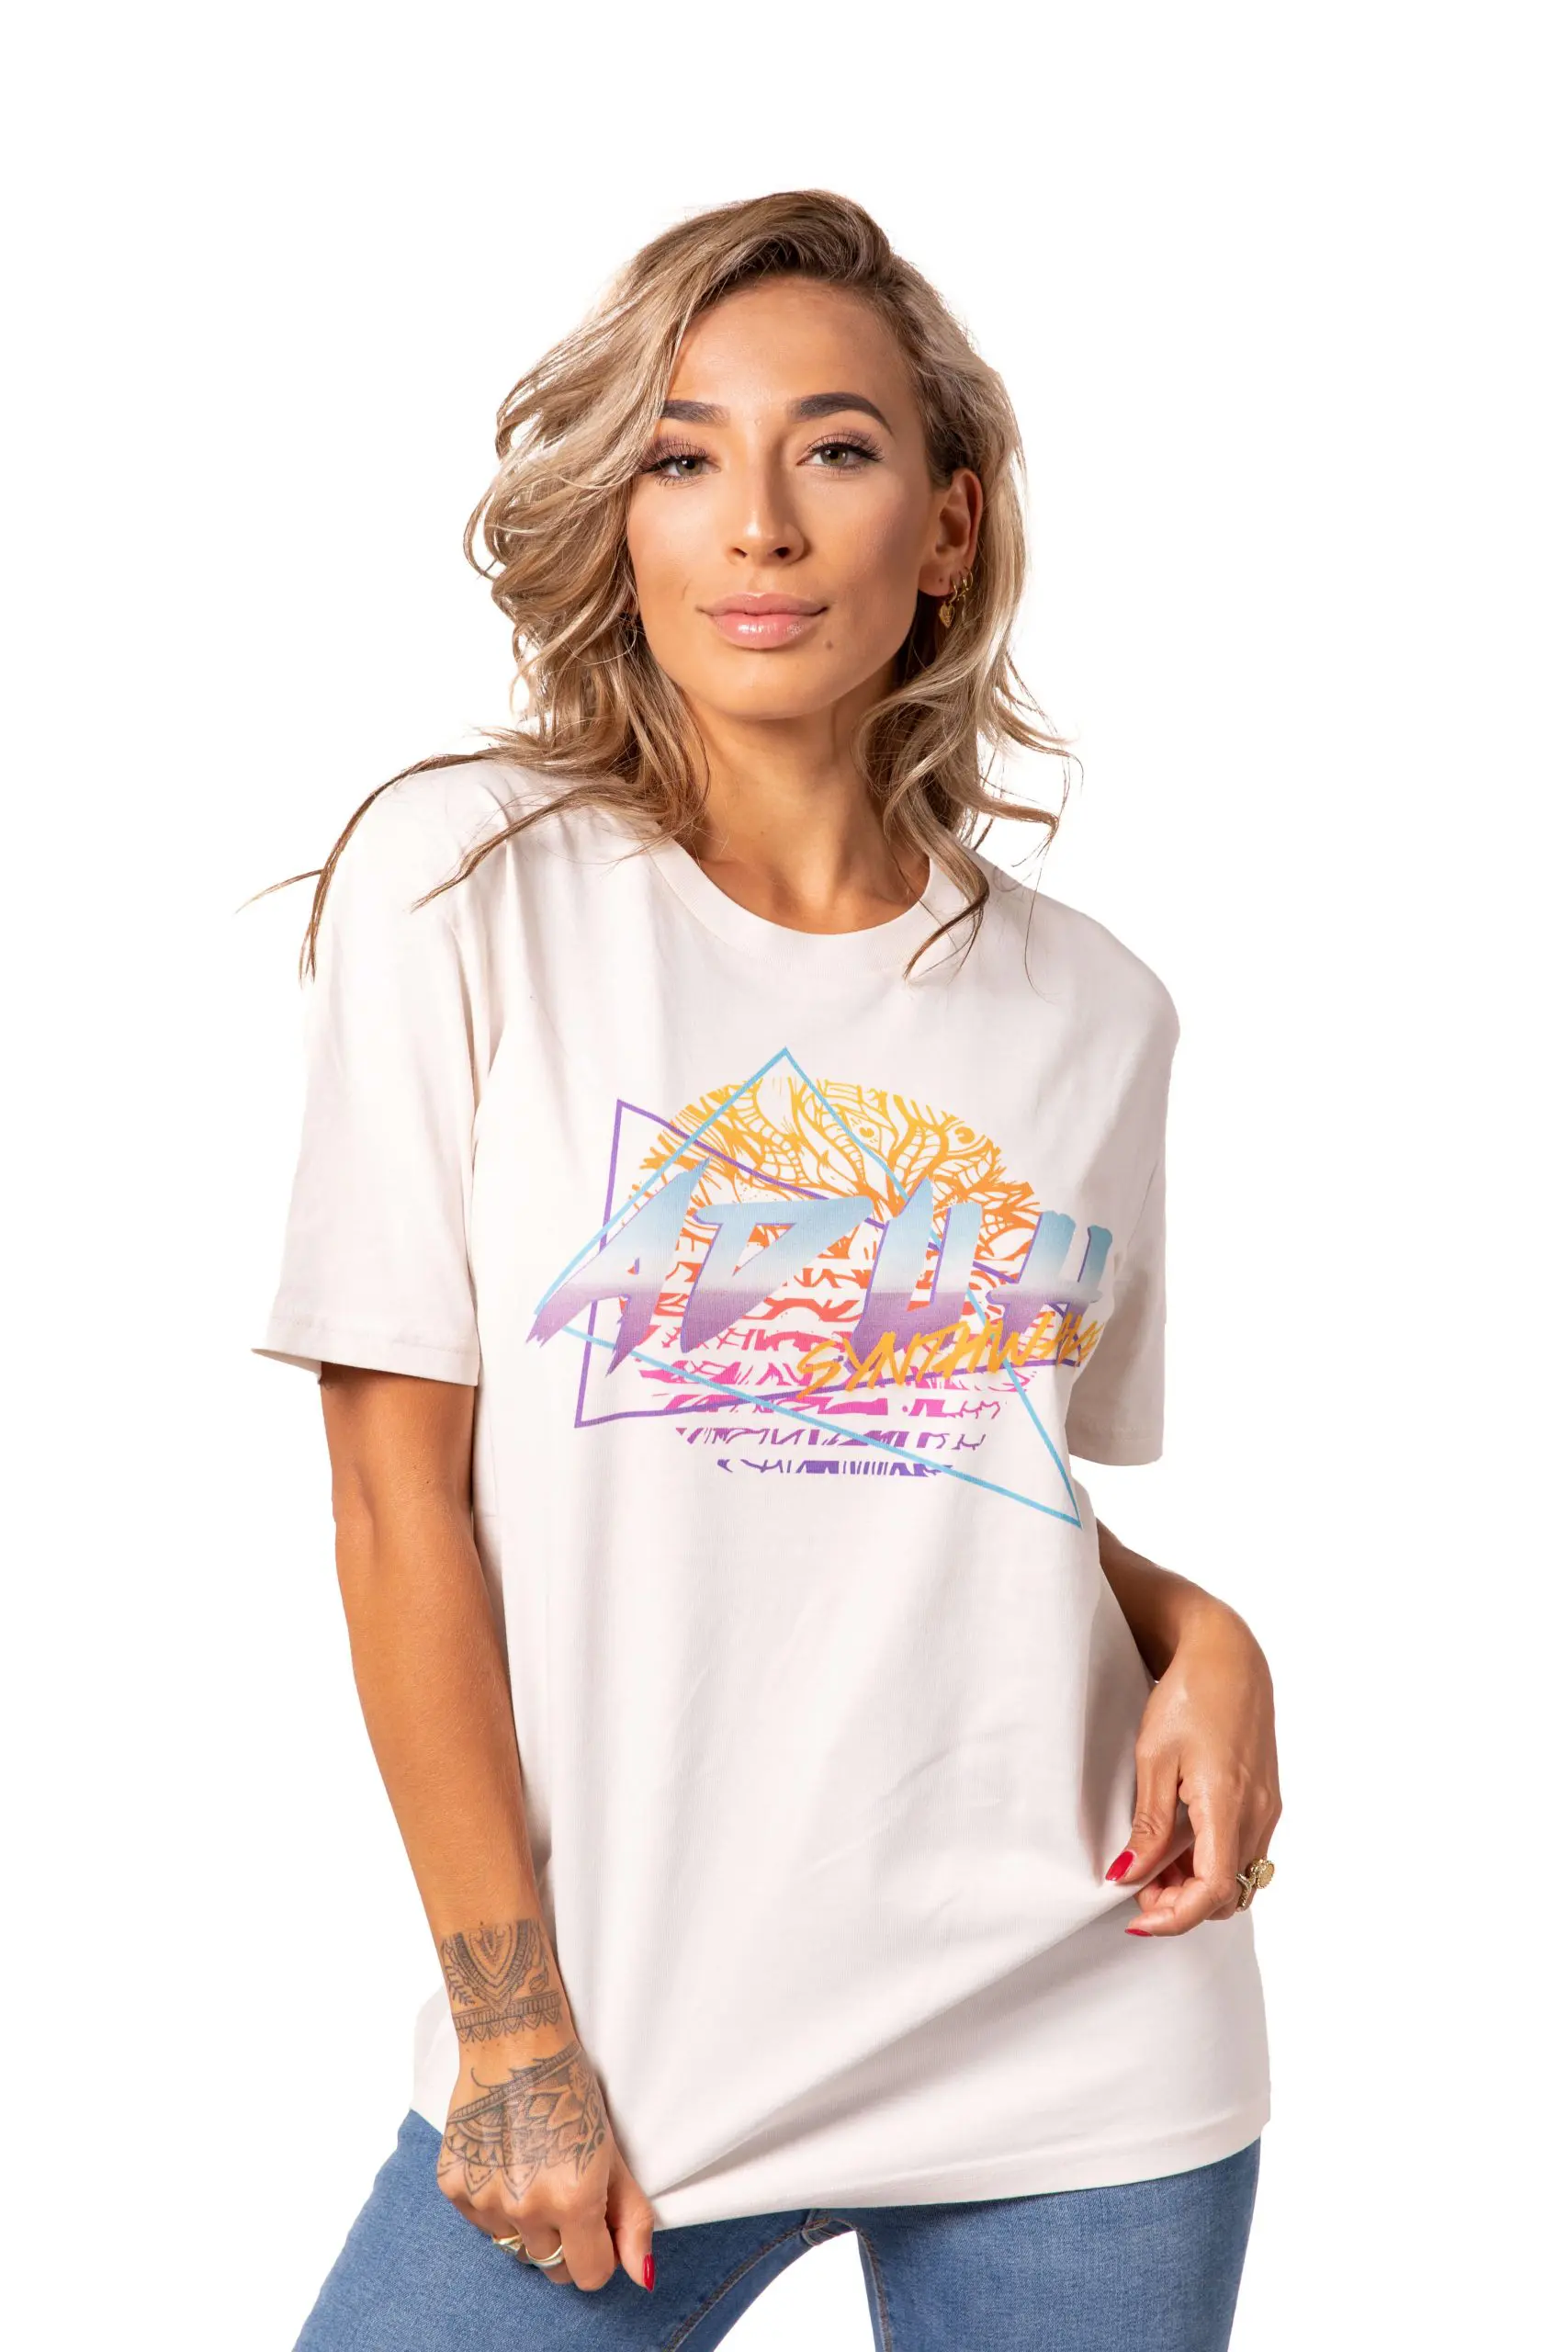 T-Shirt Synthwave White